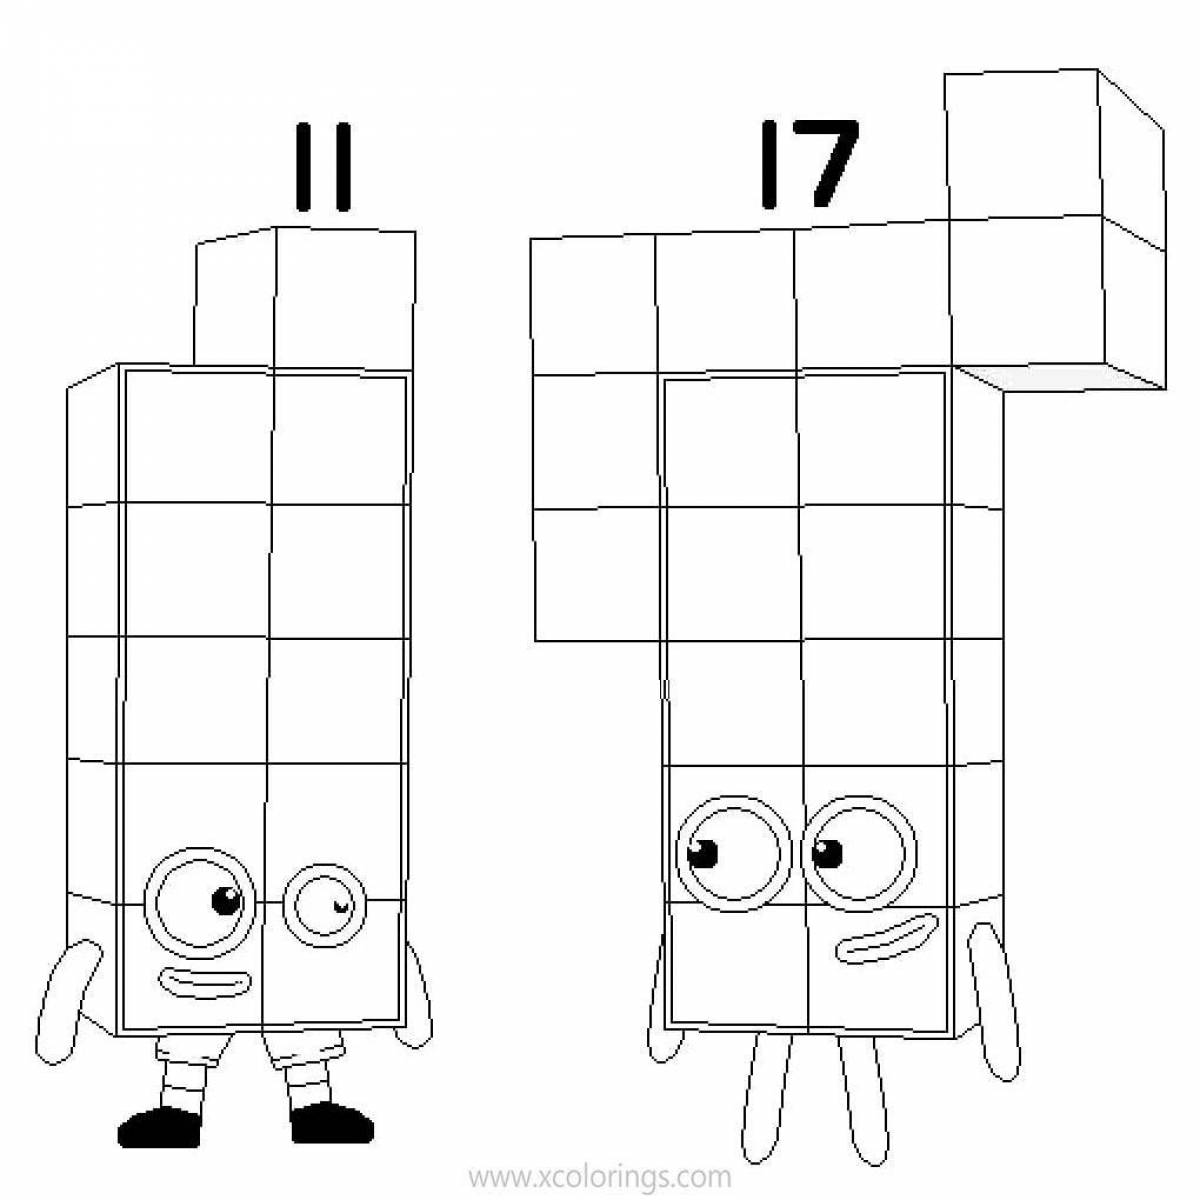 Fun coloring page with numbers